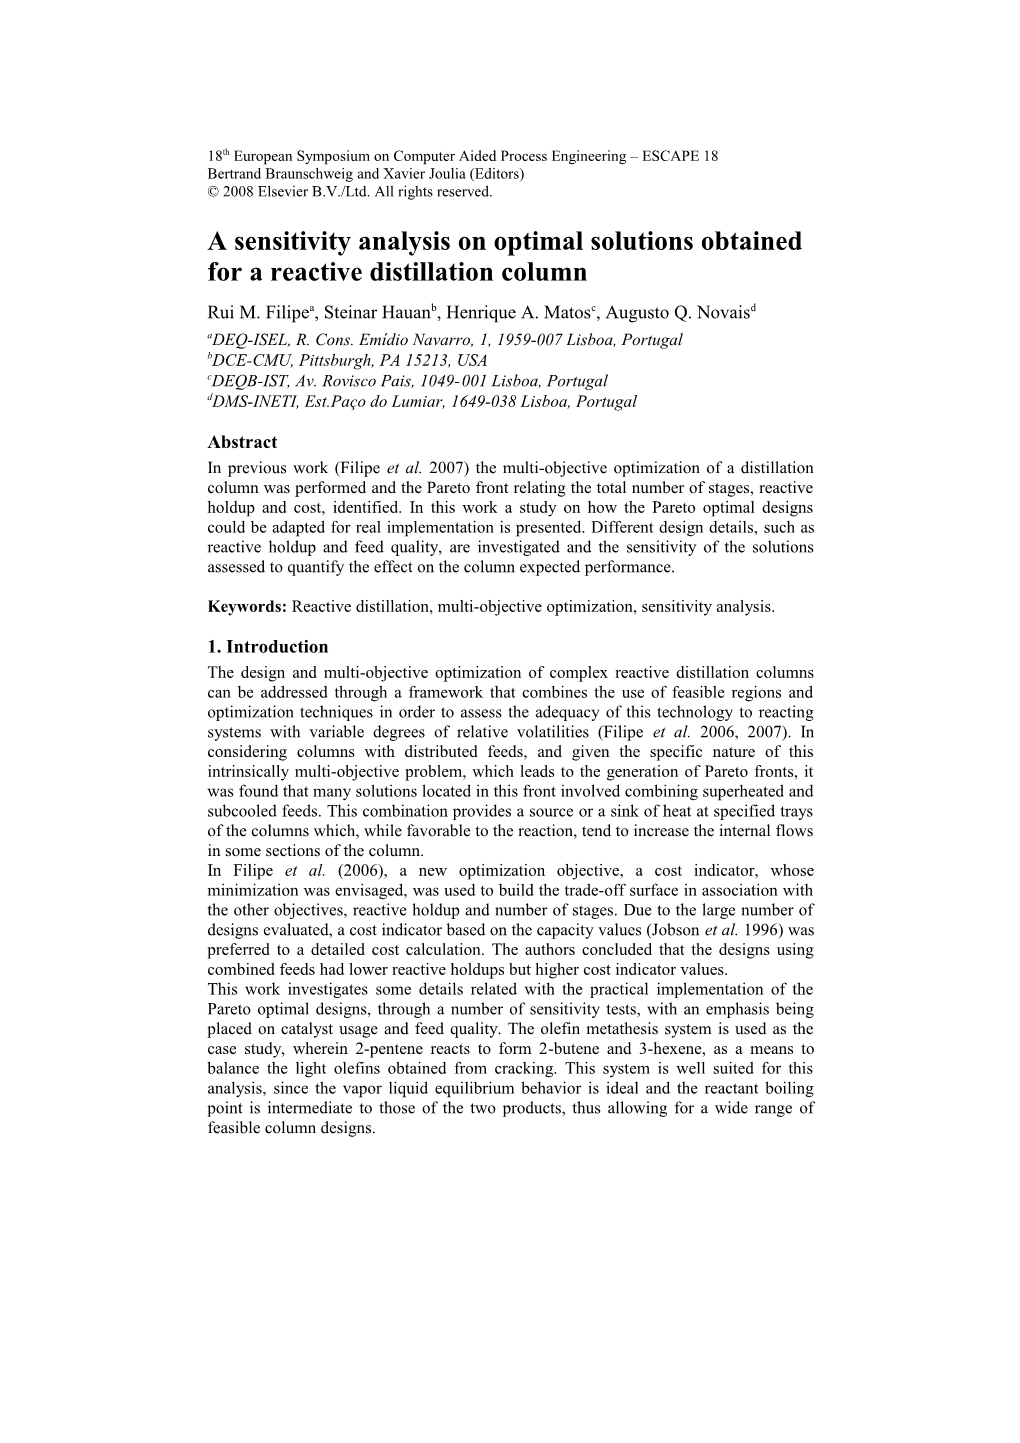 A Sensitivity Analysis on Optimal Solutions Obtained for a Reactive Distillation Column